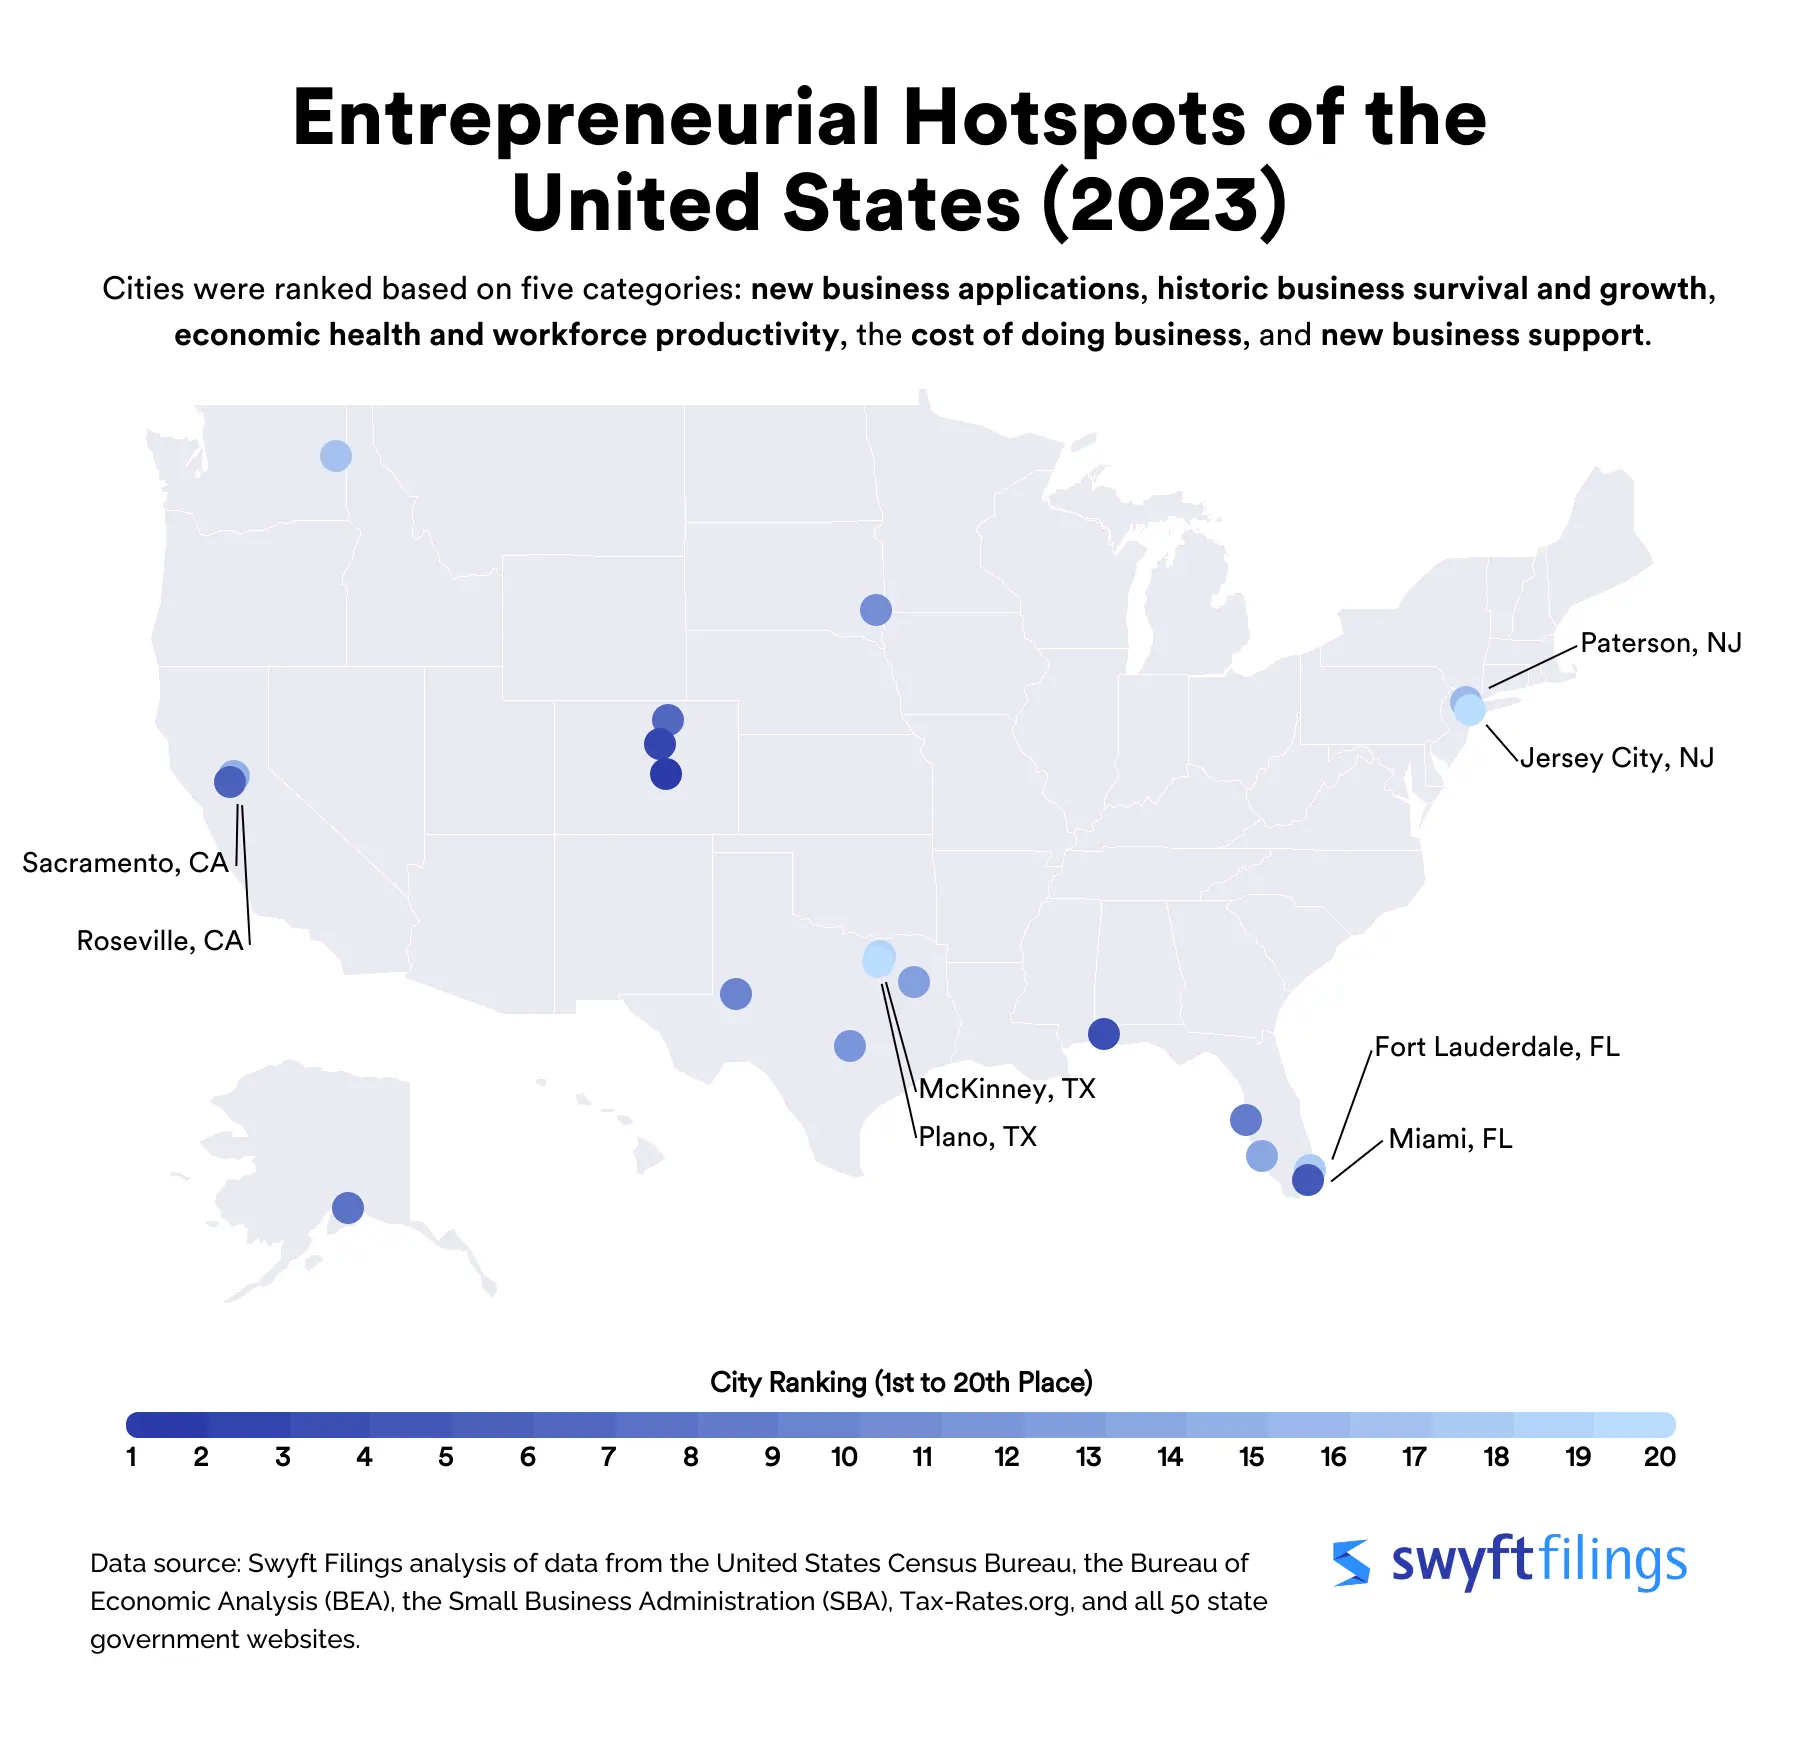 heat map of the United States featuring the top 20 cities for growth in new businesses and new business opportunity